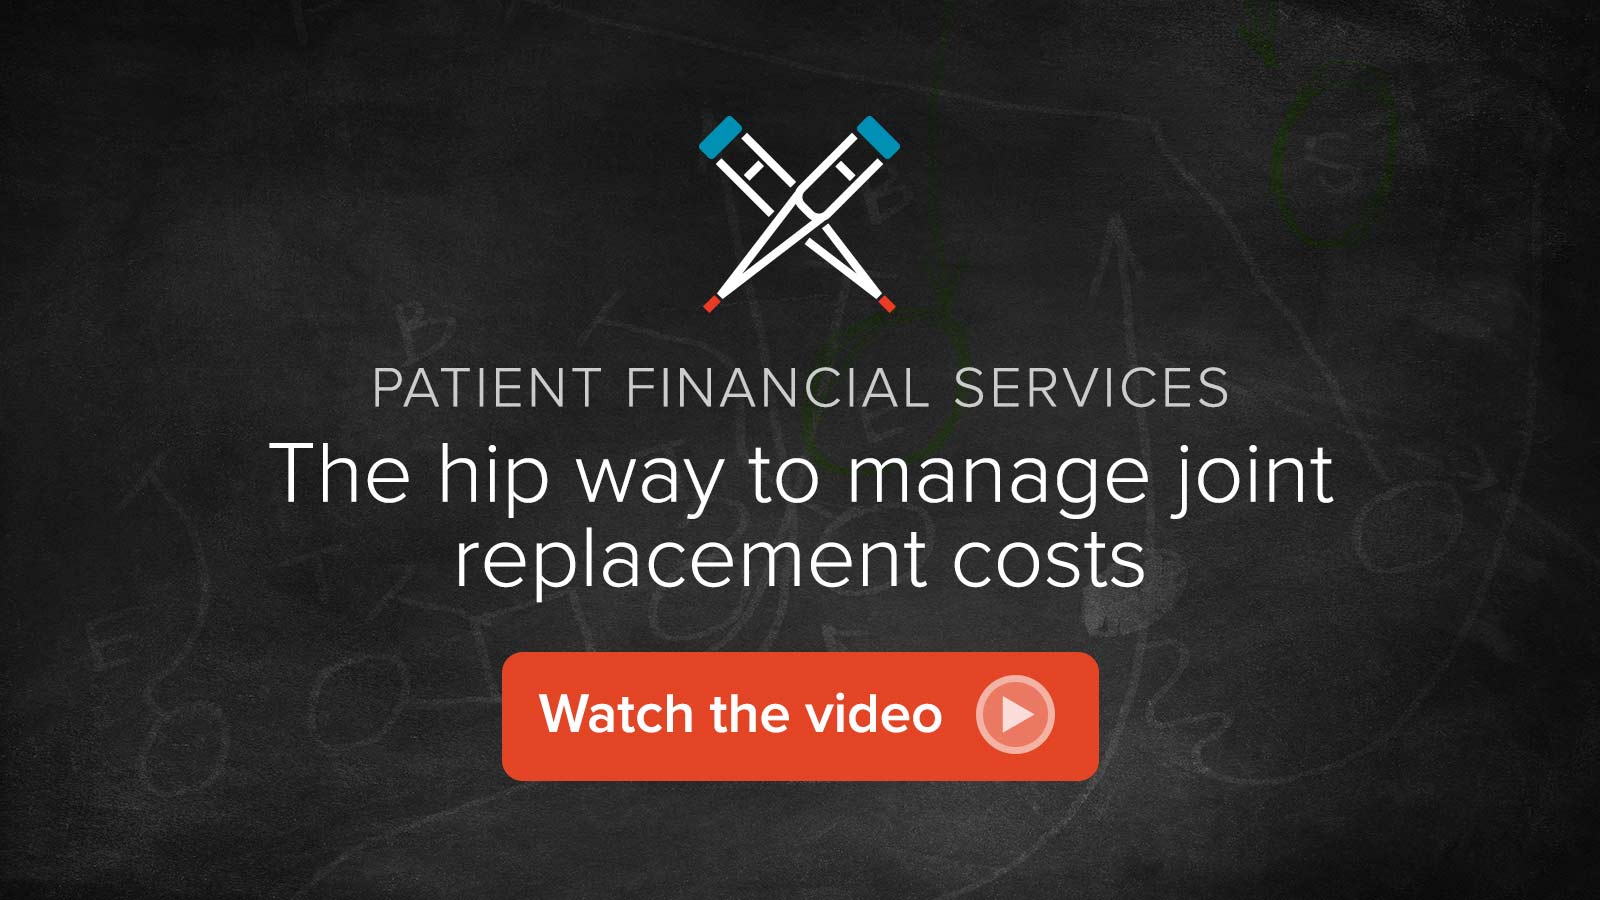 Watch the The hip way to manage joint replacement costs video